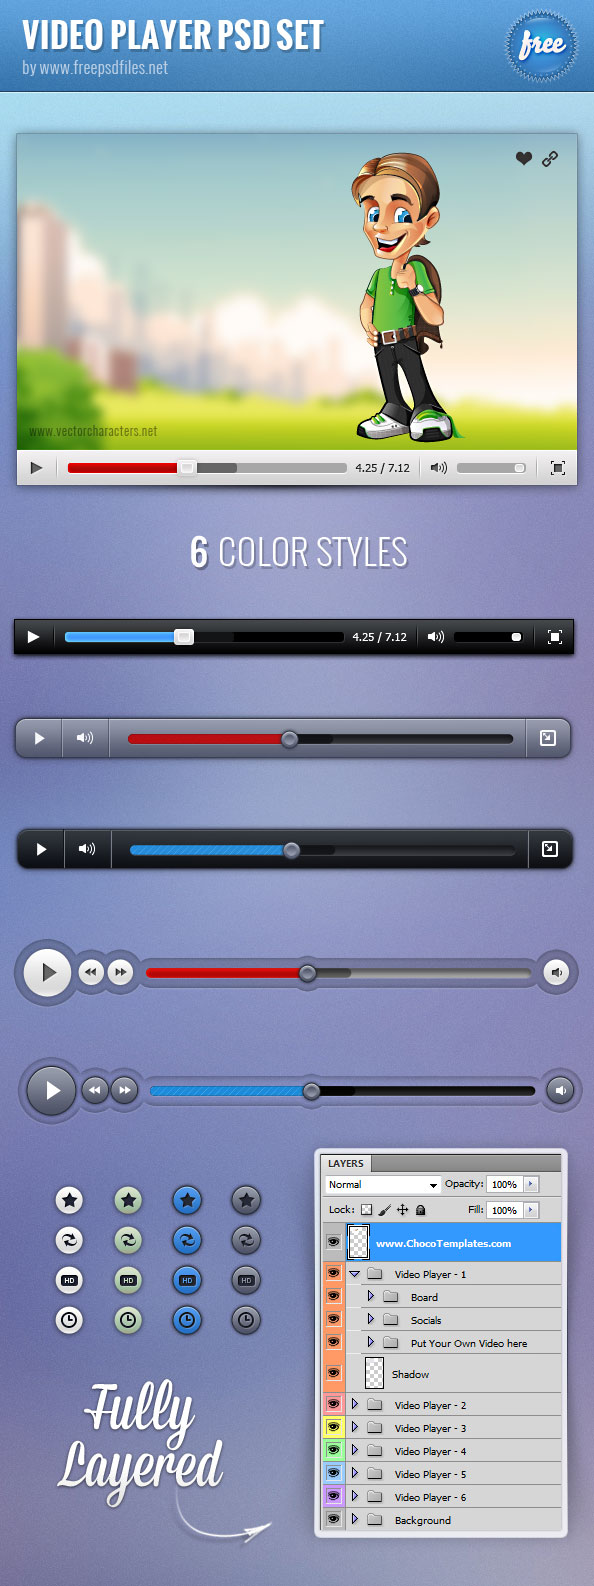 Video Player PSD Set Preview